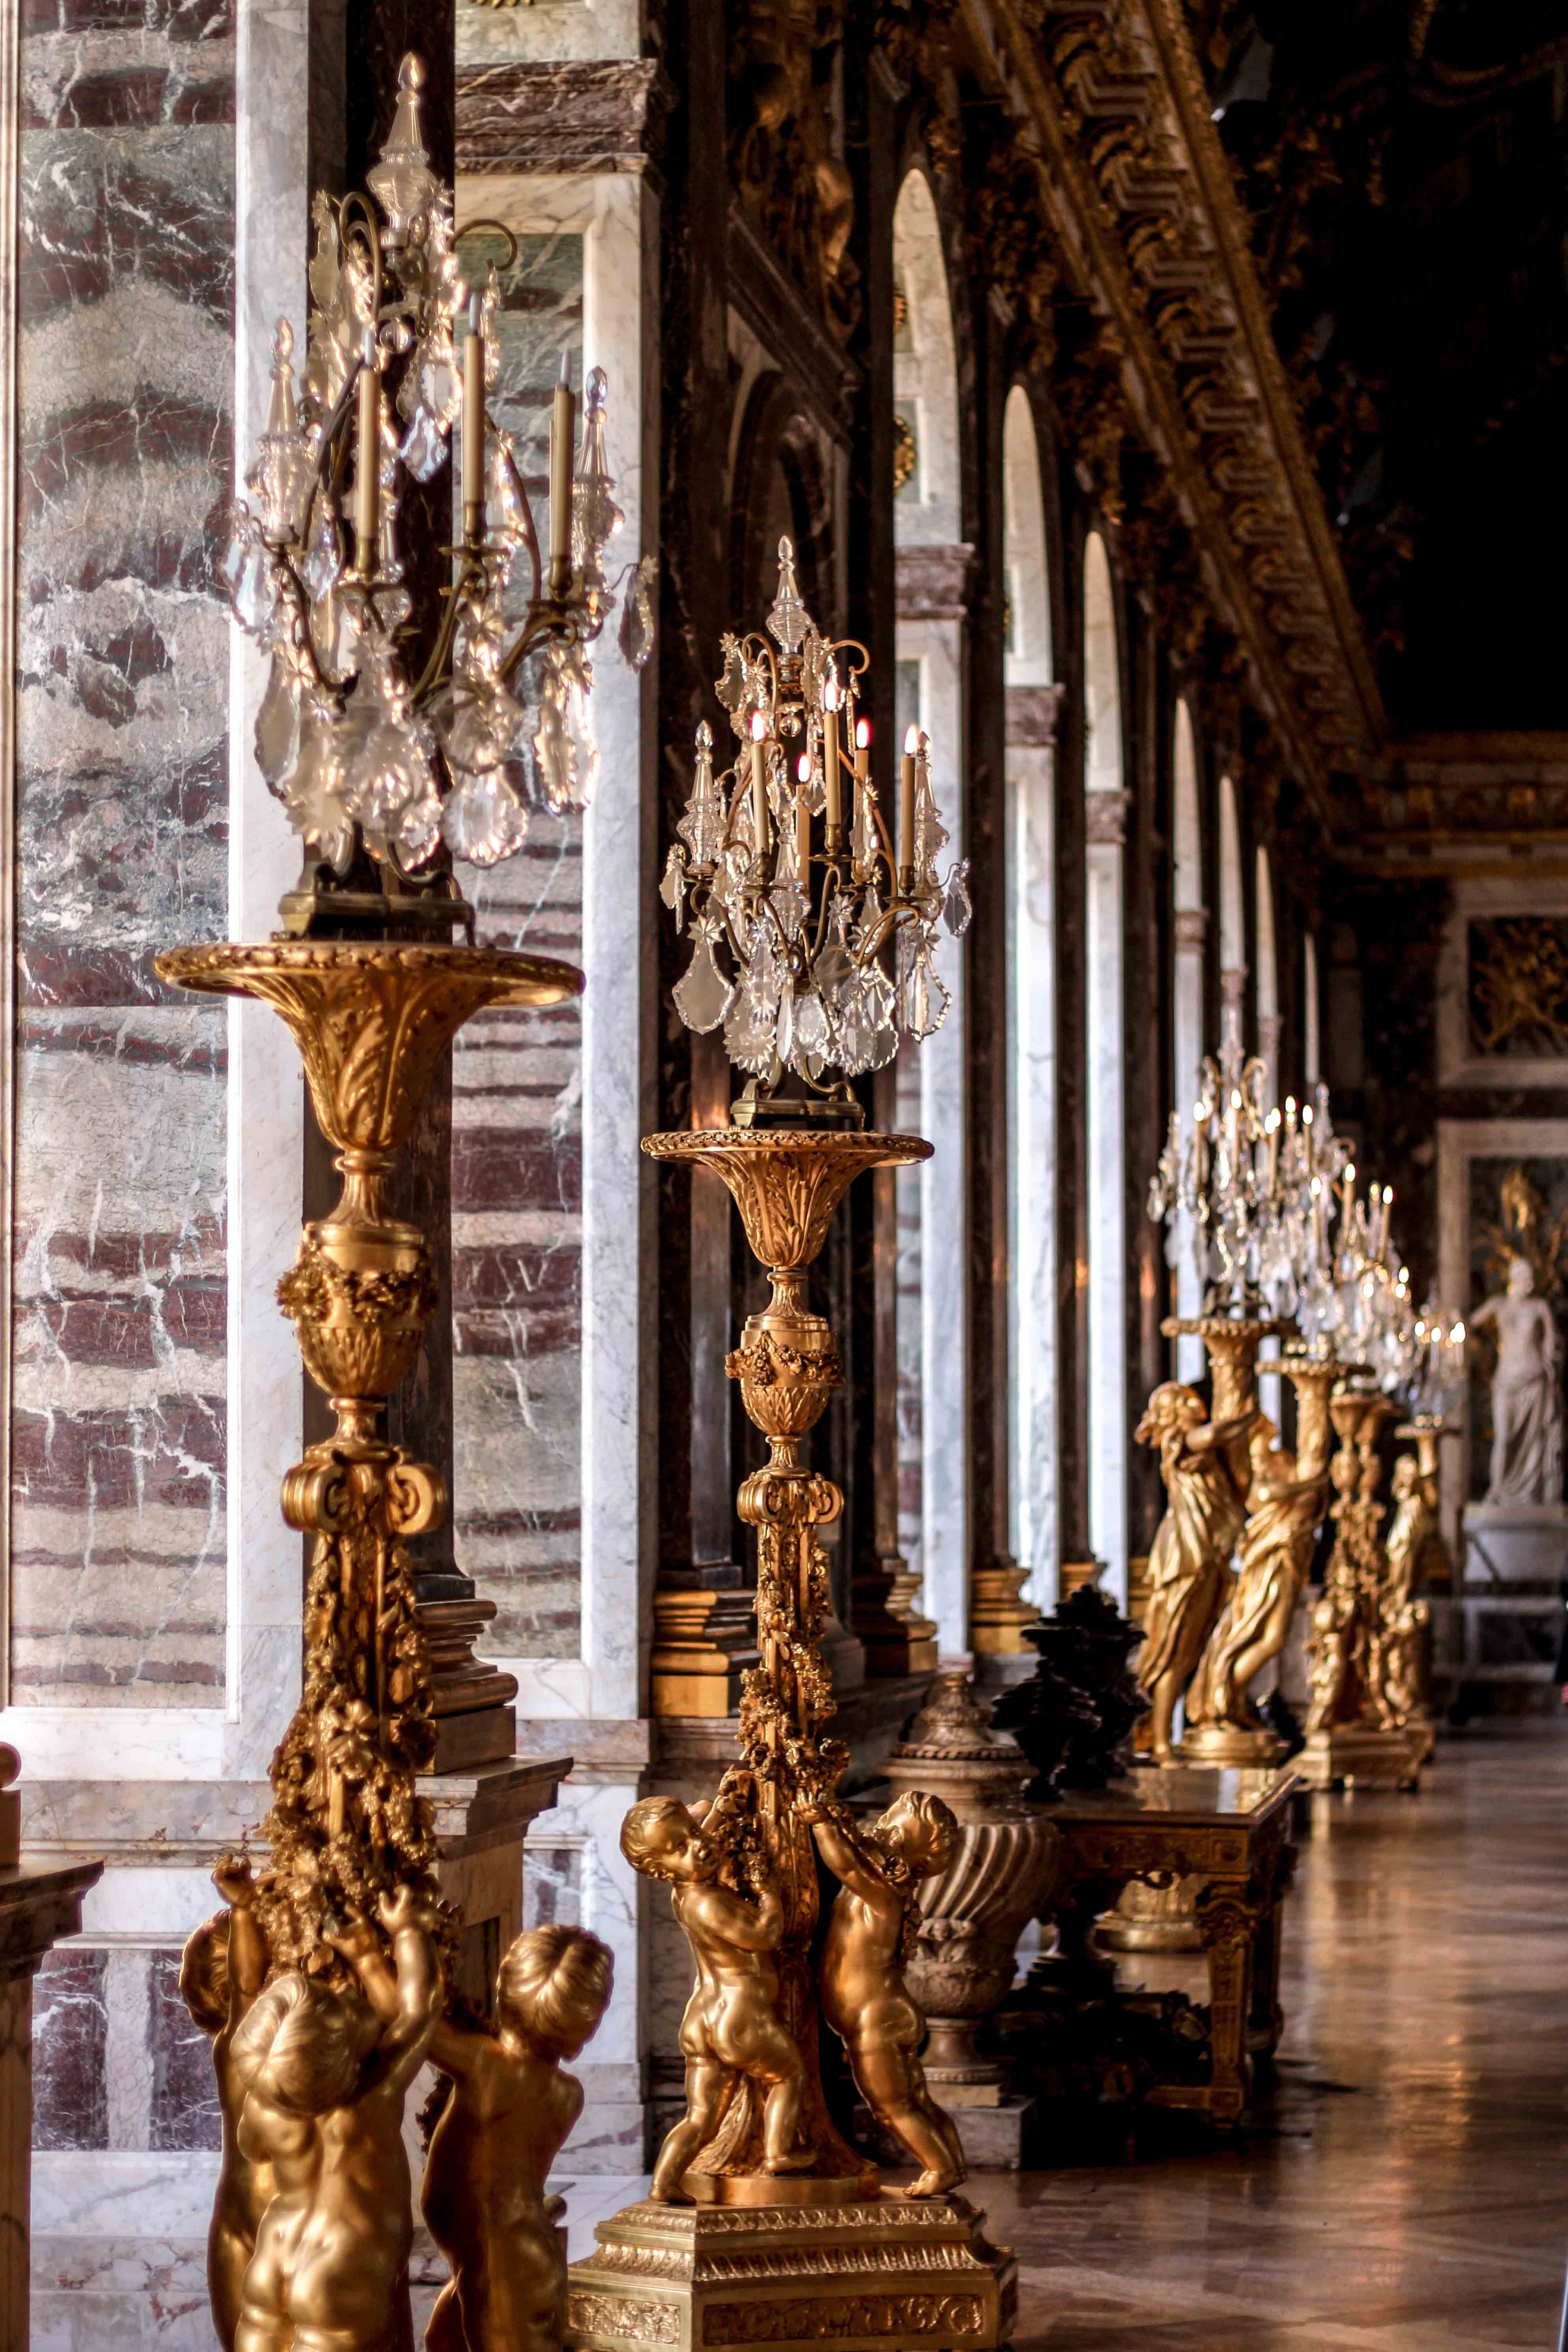 A room with many gold statues and chandeliers - Royalcore